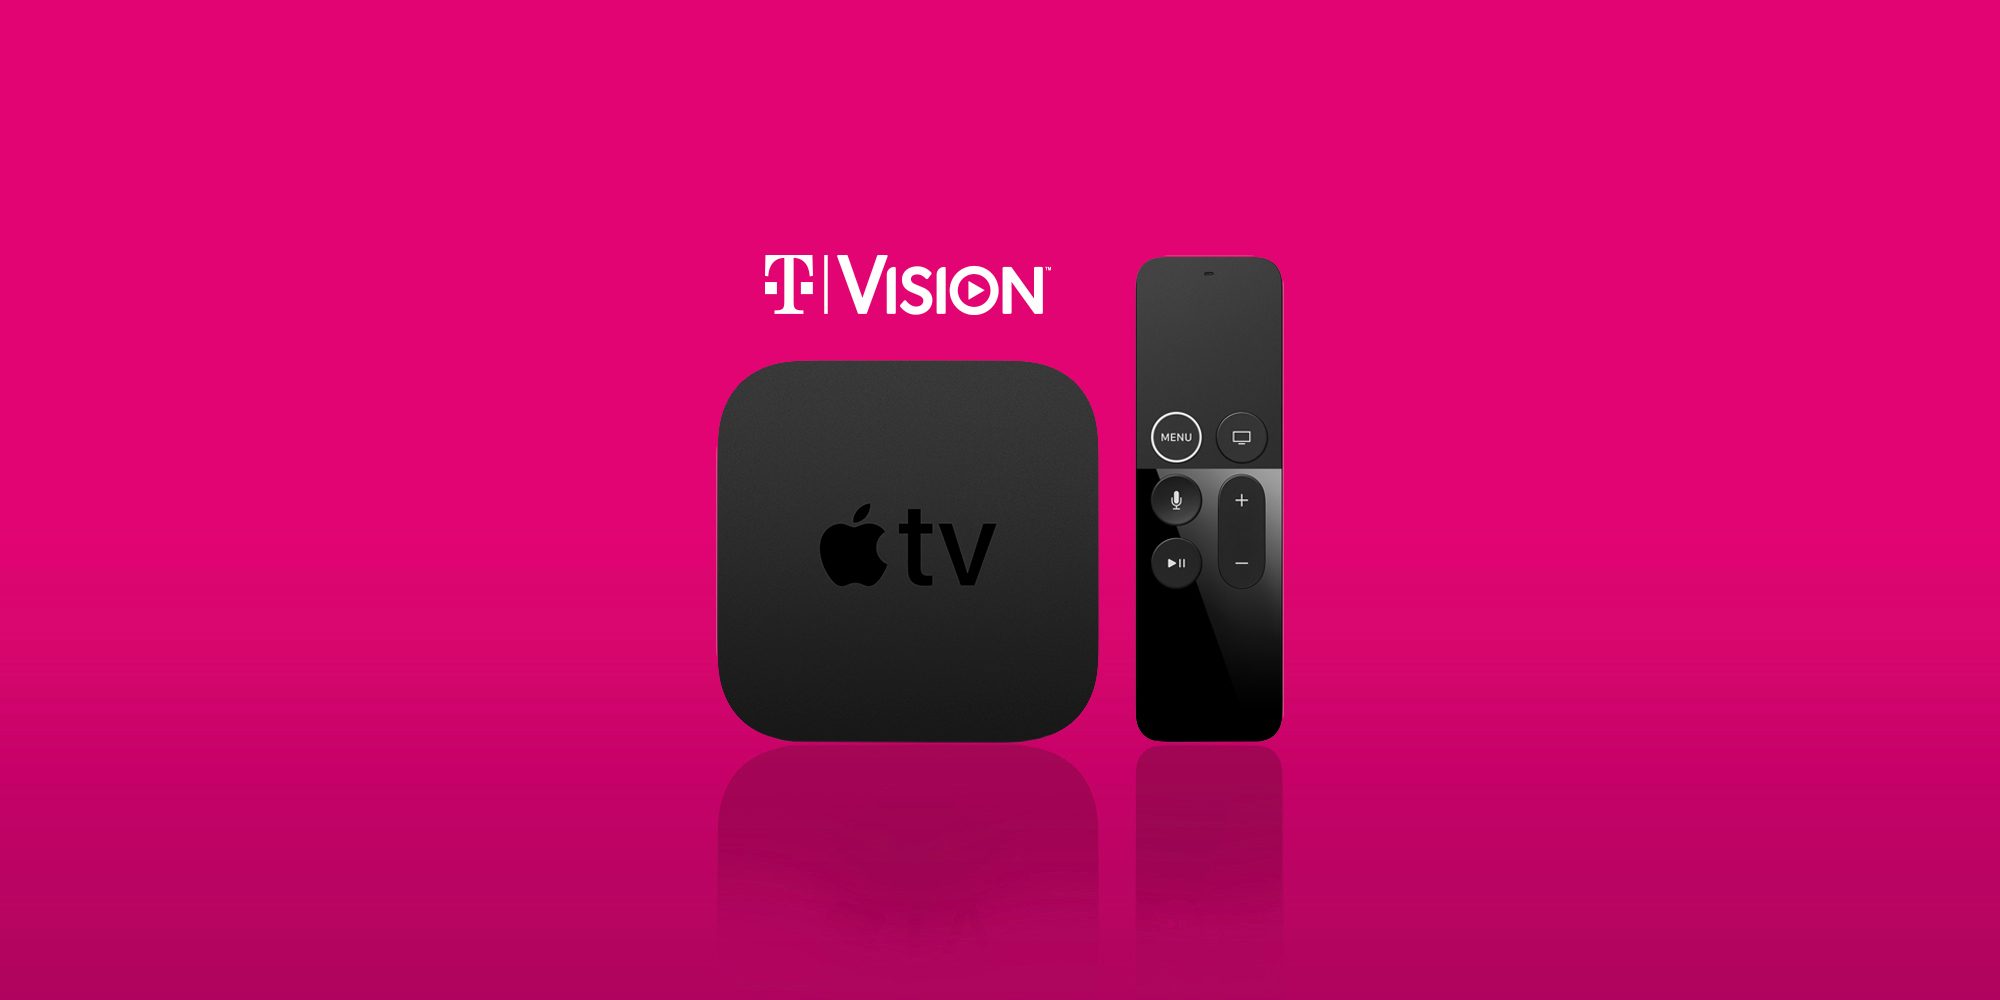 T-Mobile announces live TV service starting at $ 10 per month on Apple TV + and Apple TV 4K commercials